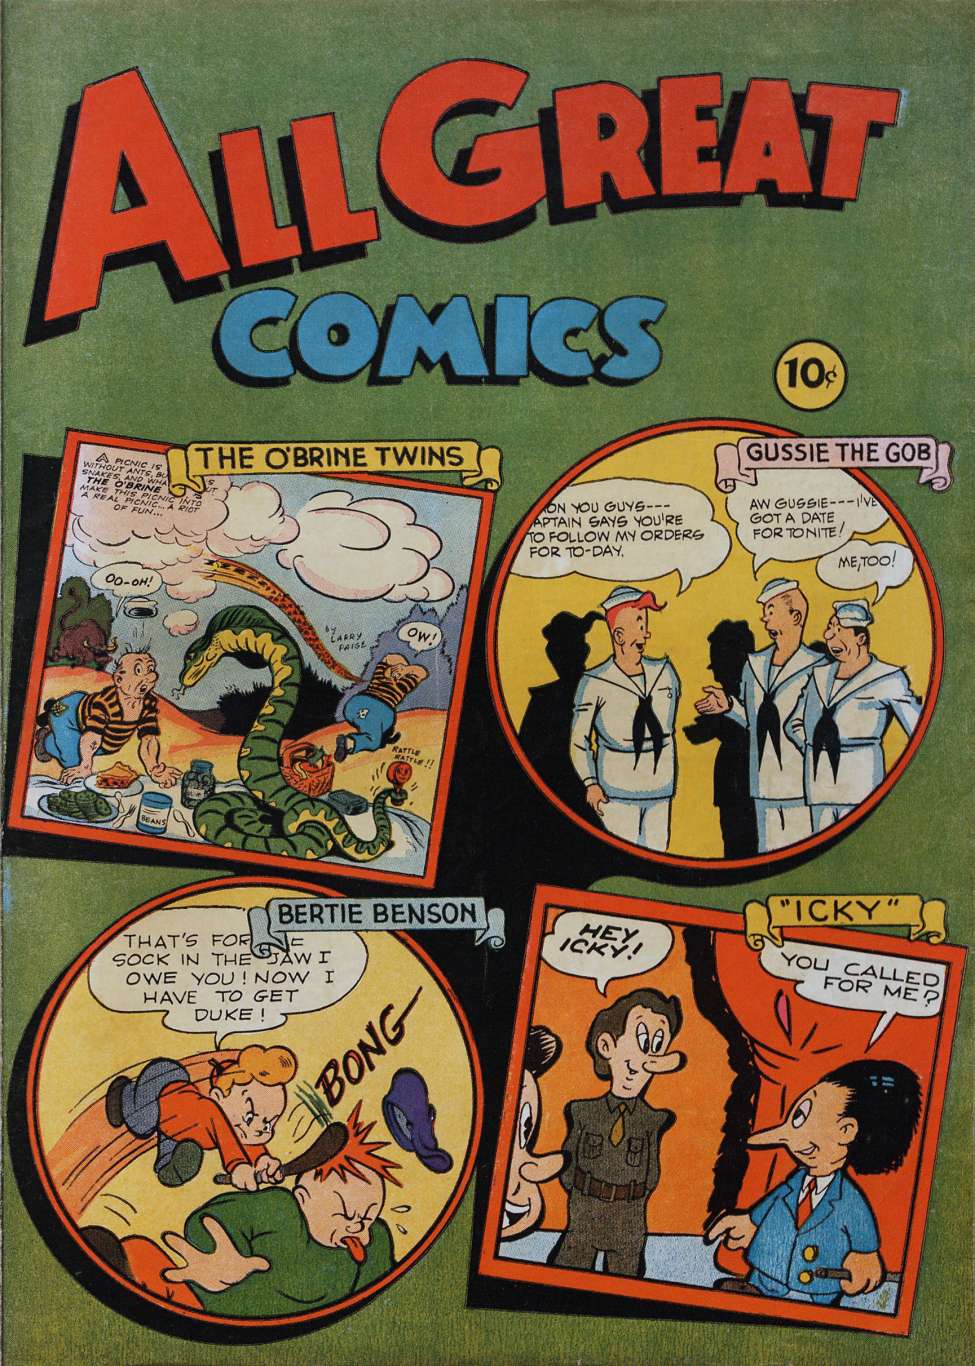 Comic Book Cover For All Great Comics 1